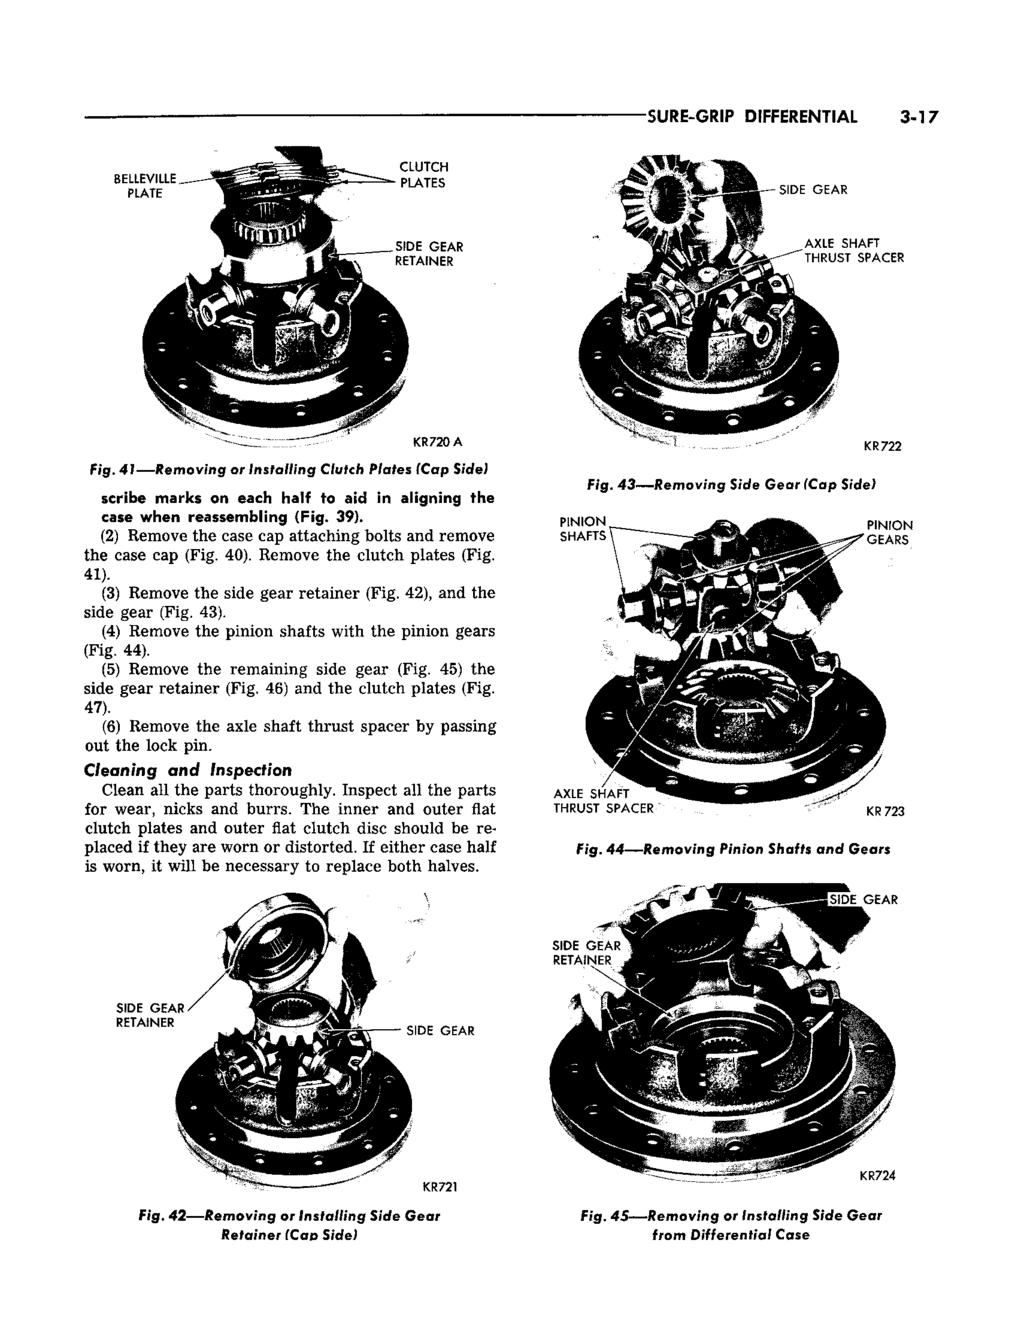 SURE-GRIP DIFFERENTIAL 3-17 KR722 Fig. 41 Removing or Installing Clutch Plates (Cap Side) scribe marks on each half to aid in aligning the case when reassembling (Fig. 39).